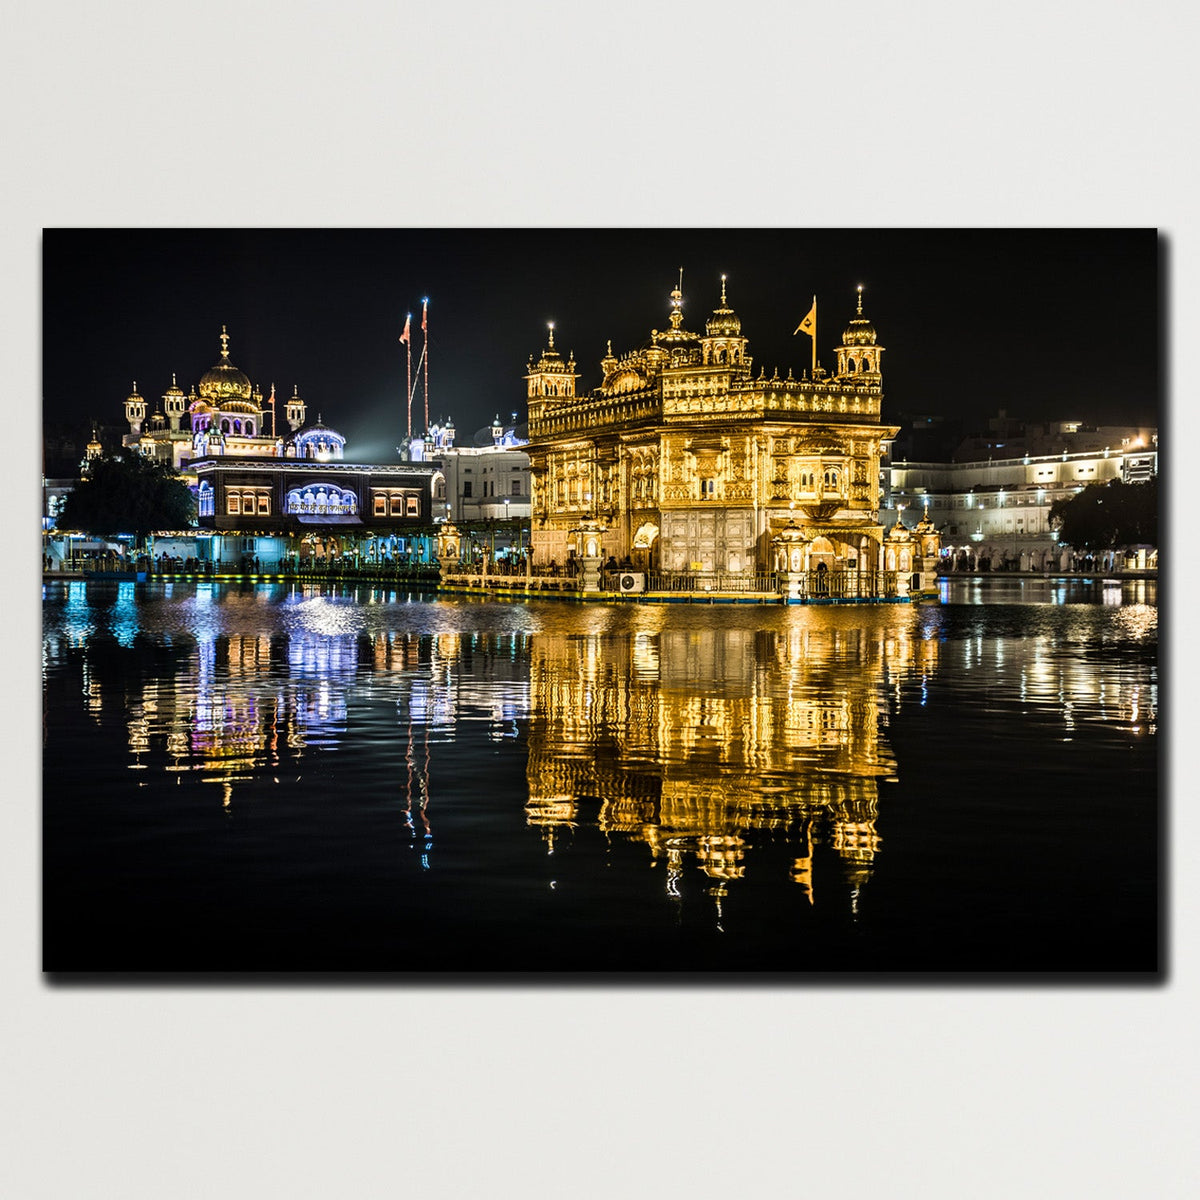 https://cdn.shopify.com/s/files/1/0387/9986/8044/products/TheMajesticGoldenTempleCanvasArtprintStretched-Plain.jpg